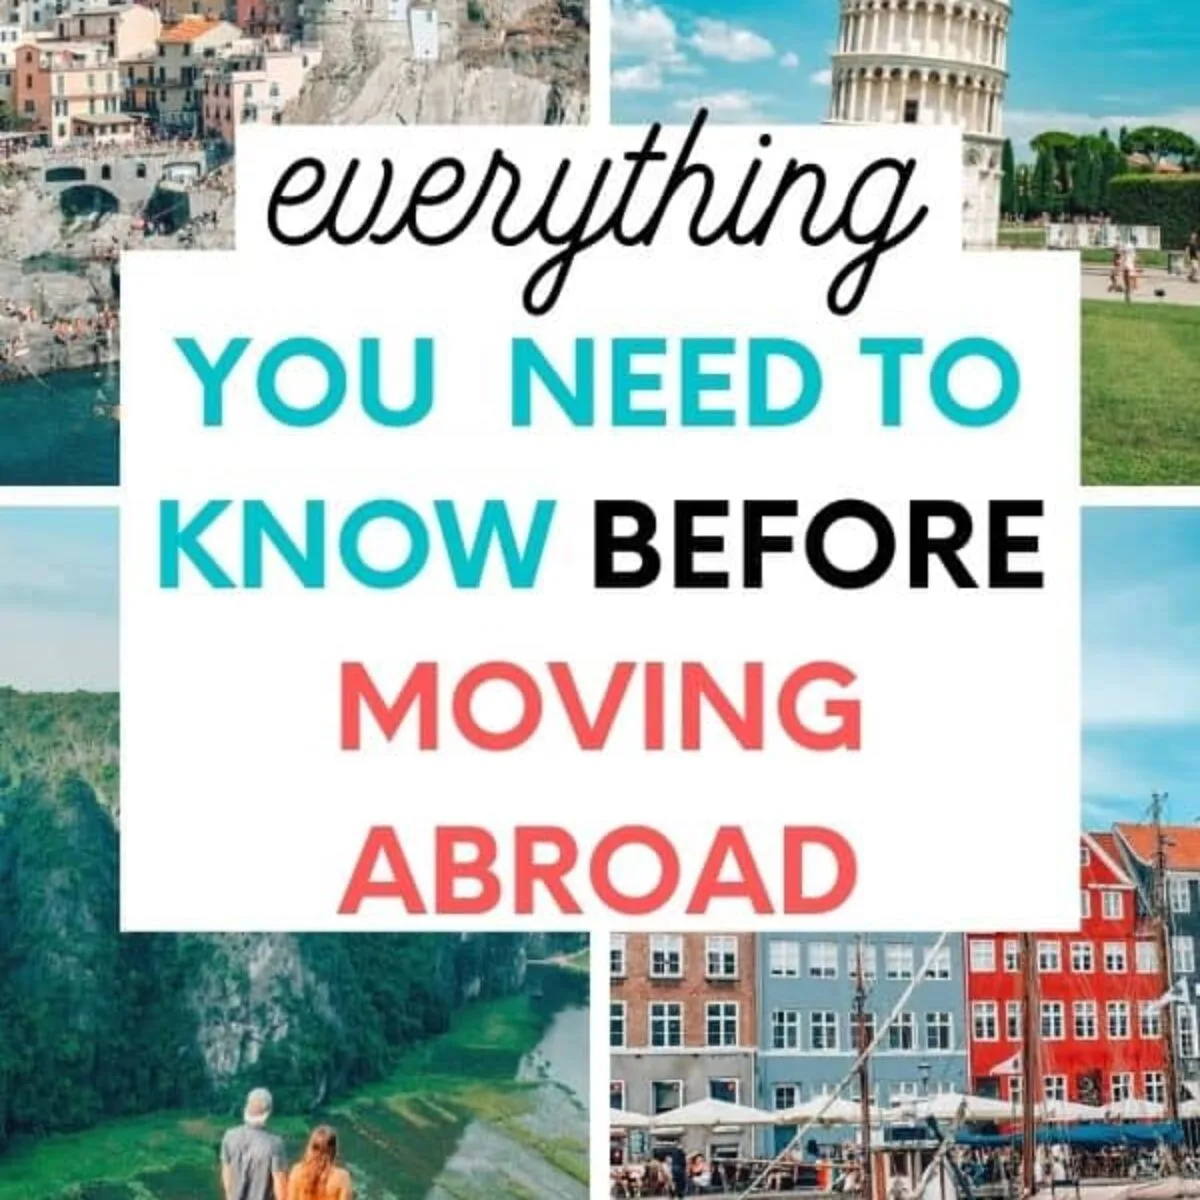 Living Abroad: 14 Advantages and Disadvantages You Need to Know